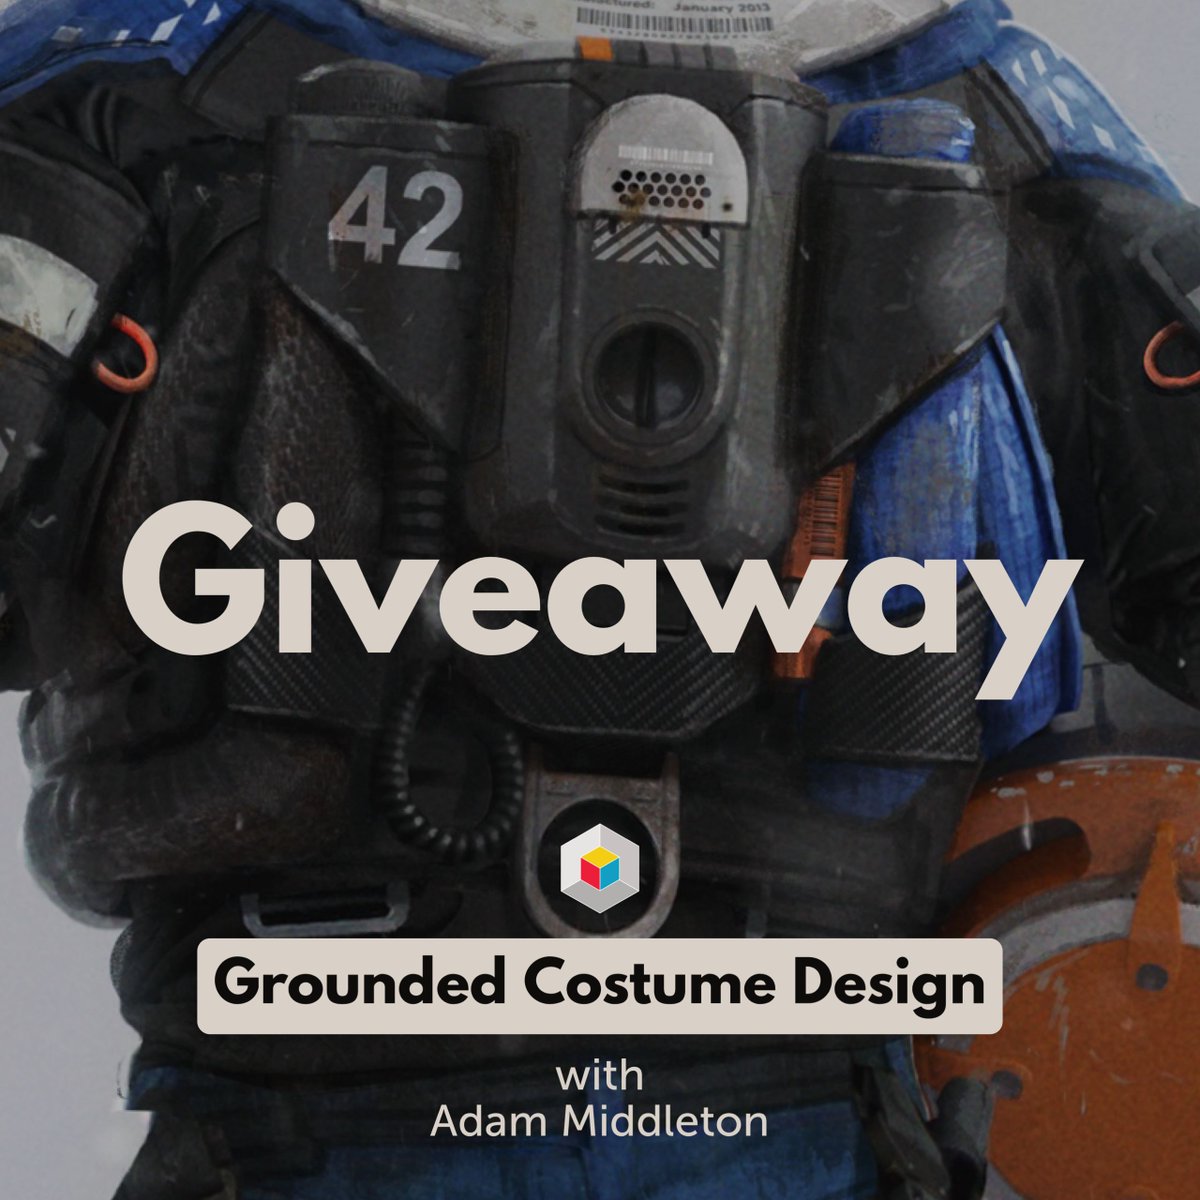 GIVEAWAY - 3 Lucky winners will walk away with our upcoming course, Grounded Costume Design, with @adamjmiddleton

Reply to this post with #grounded and tag a friend to enter, and we’ll randomly select 3 entrants who will get this course for FREE. 

ENTRIES CLOSE Dec 15